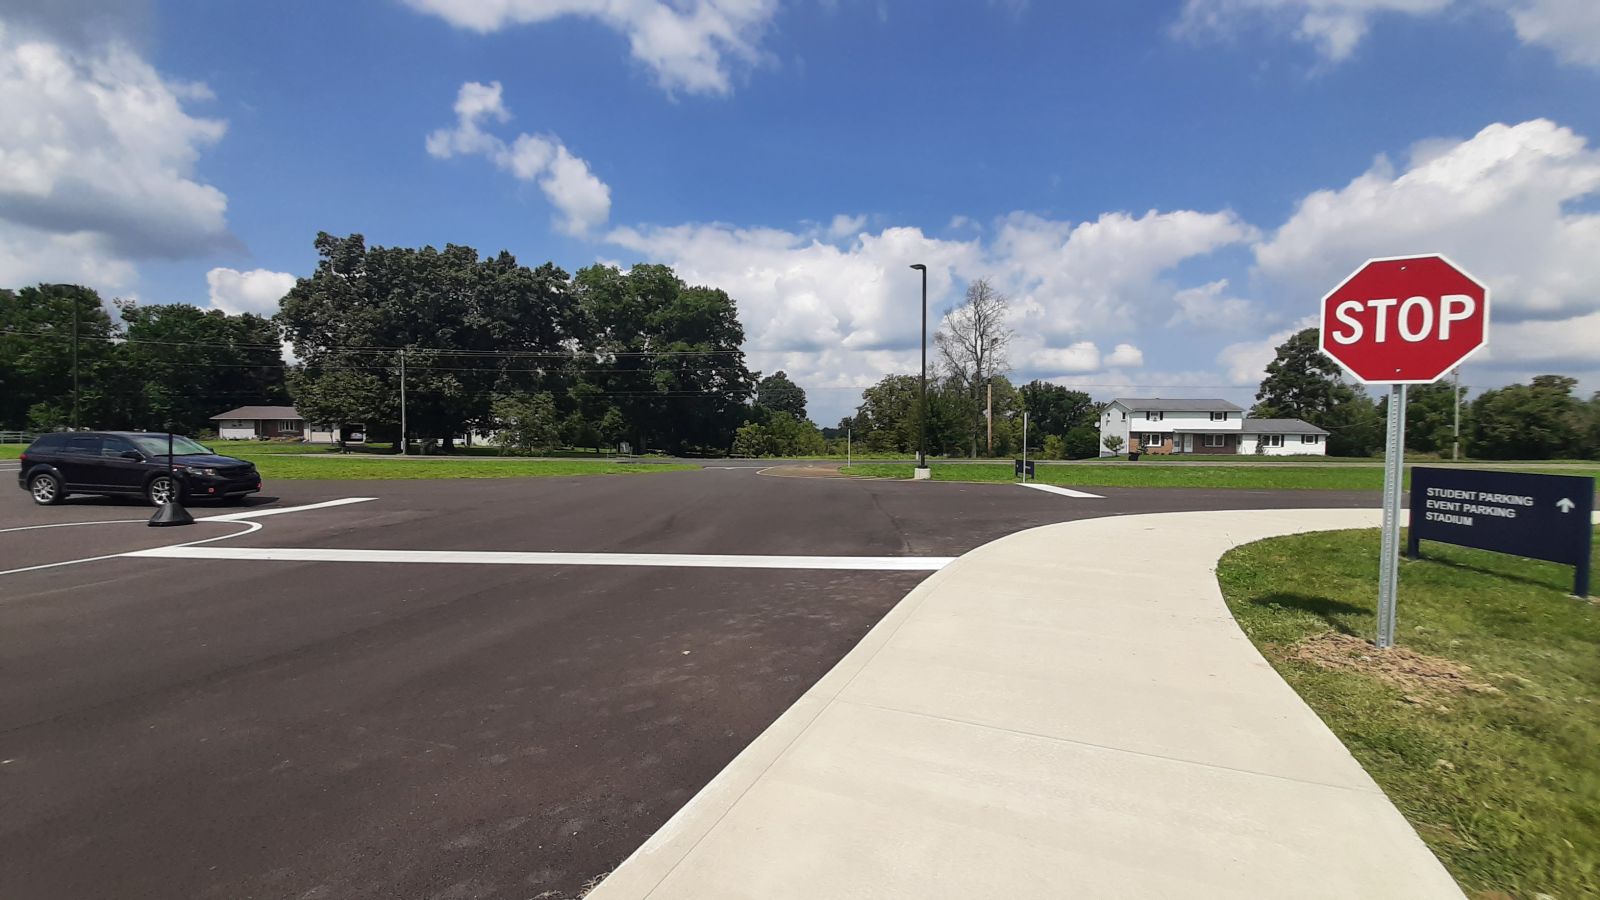 An image of the parking lot, signage, and painted lines on the blacktop.